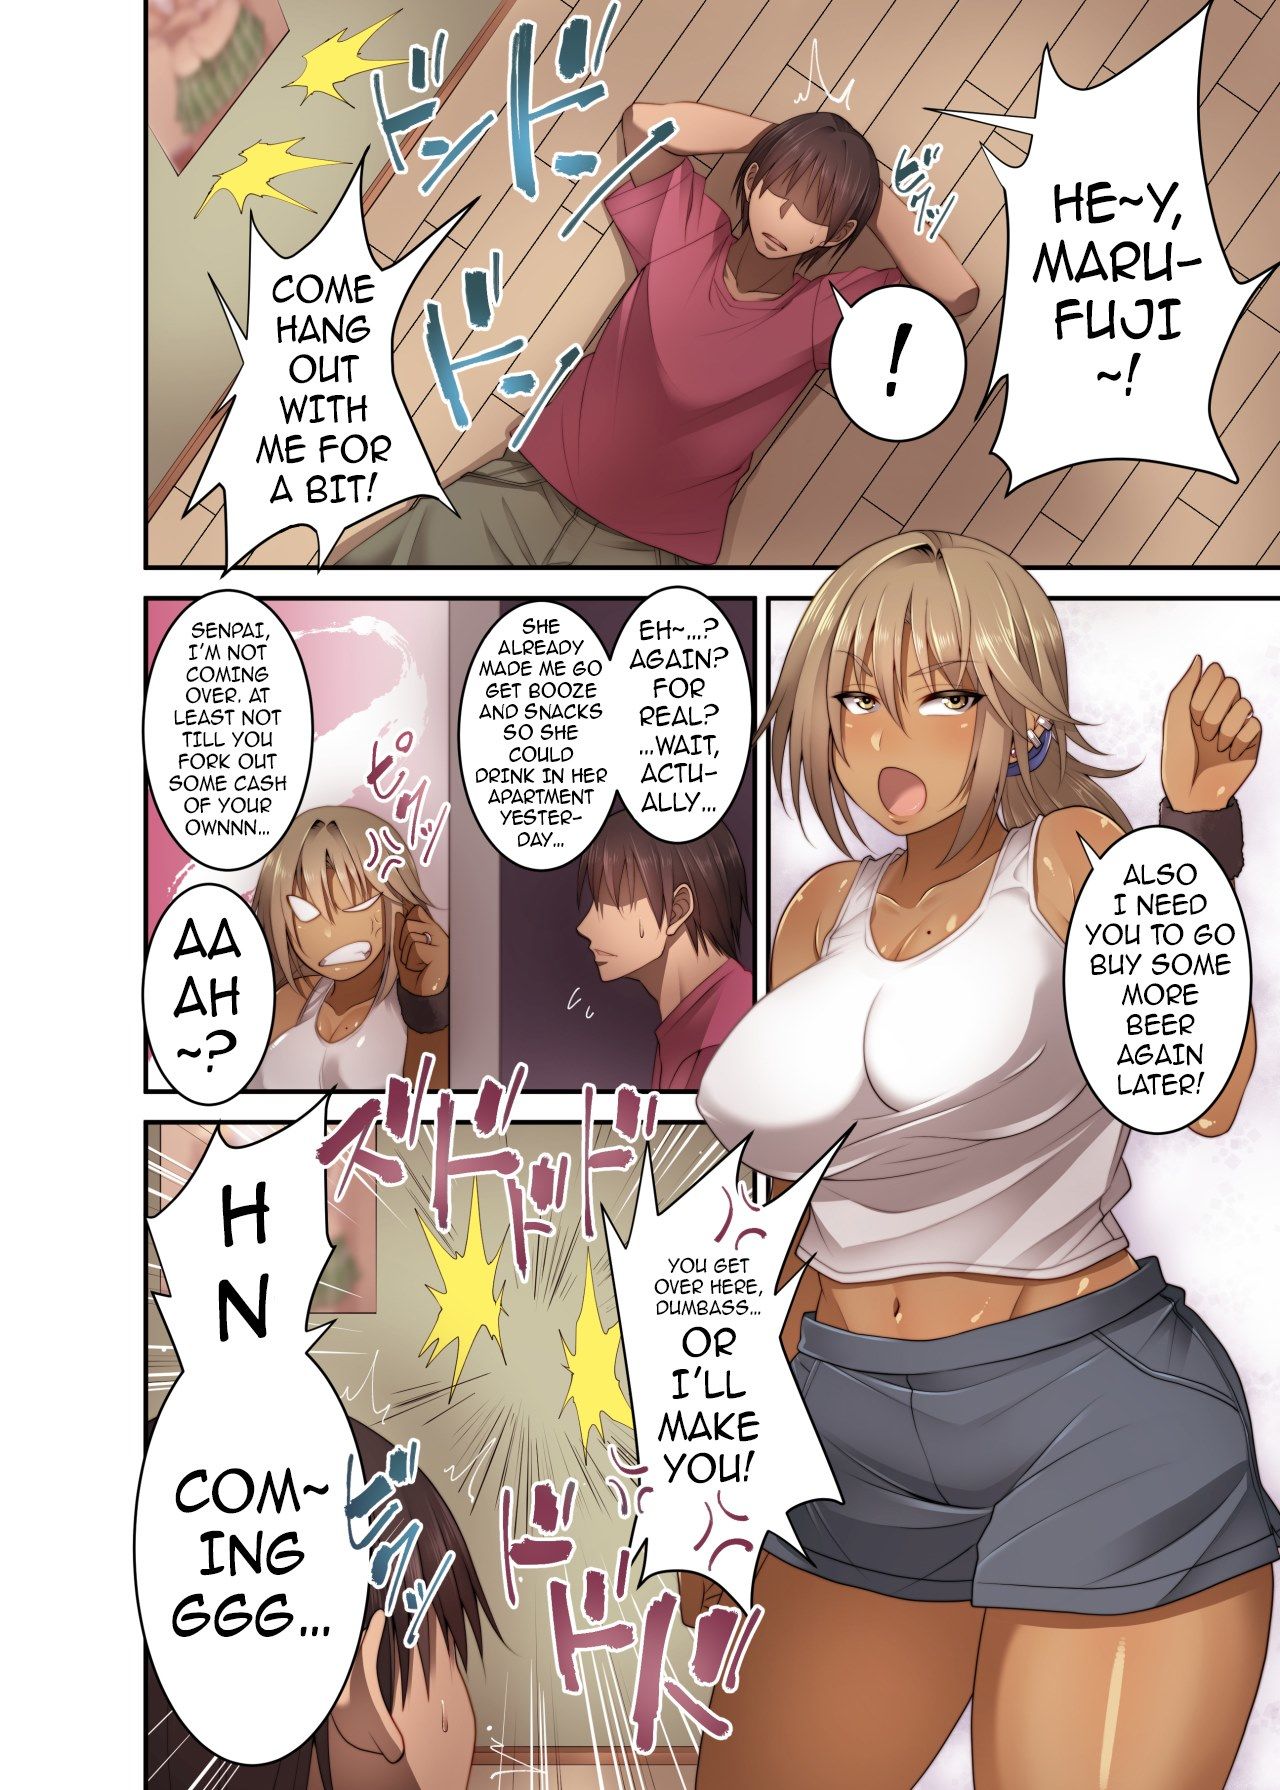 Seduced My Old Still Hard to Deal with (Married) Senior by korotsuke page 3